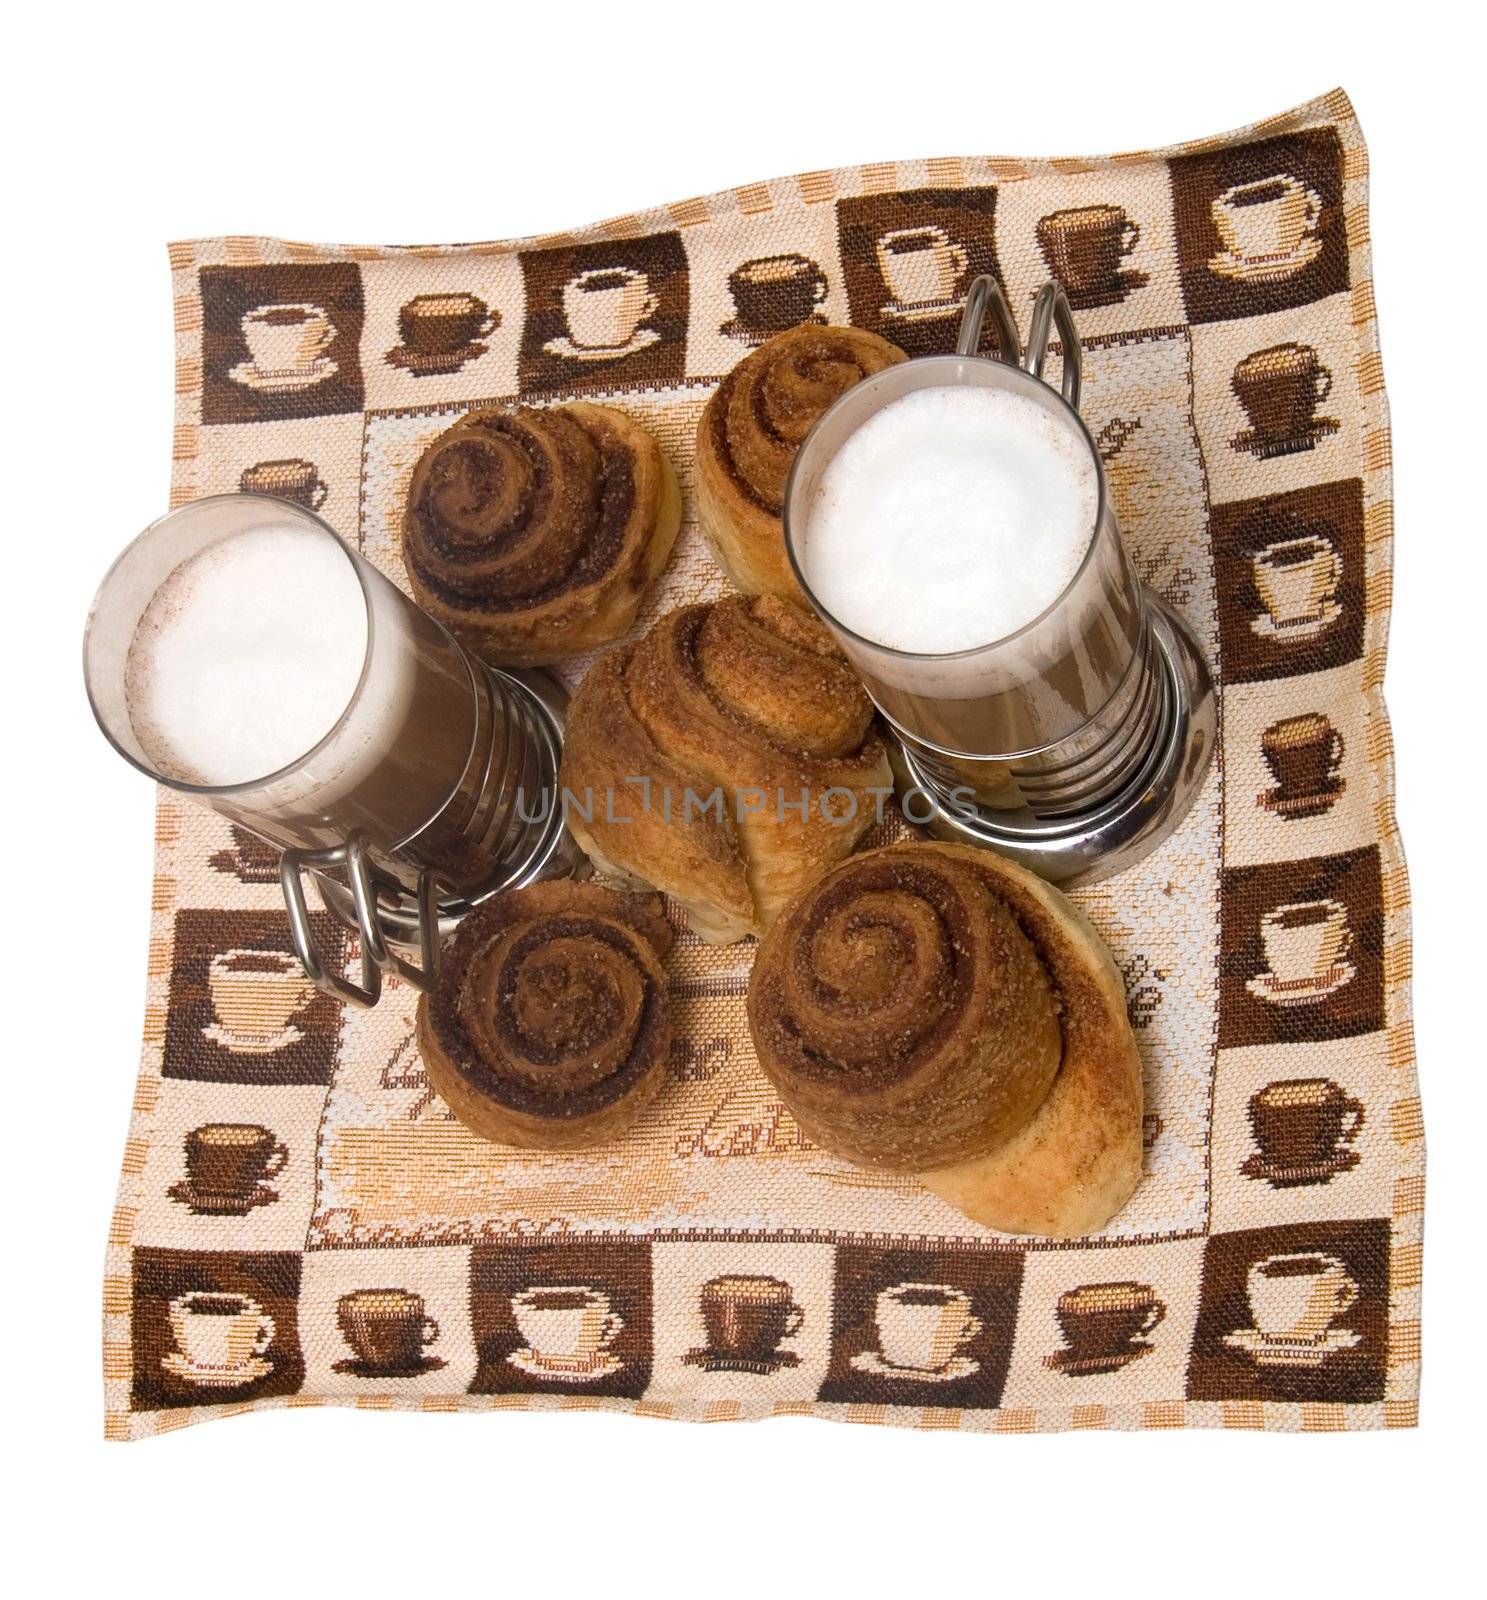 Home-made cinnamon snail bakery with latte by lilsla